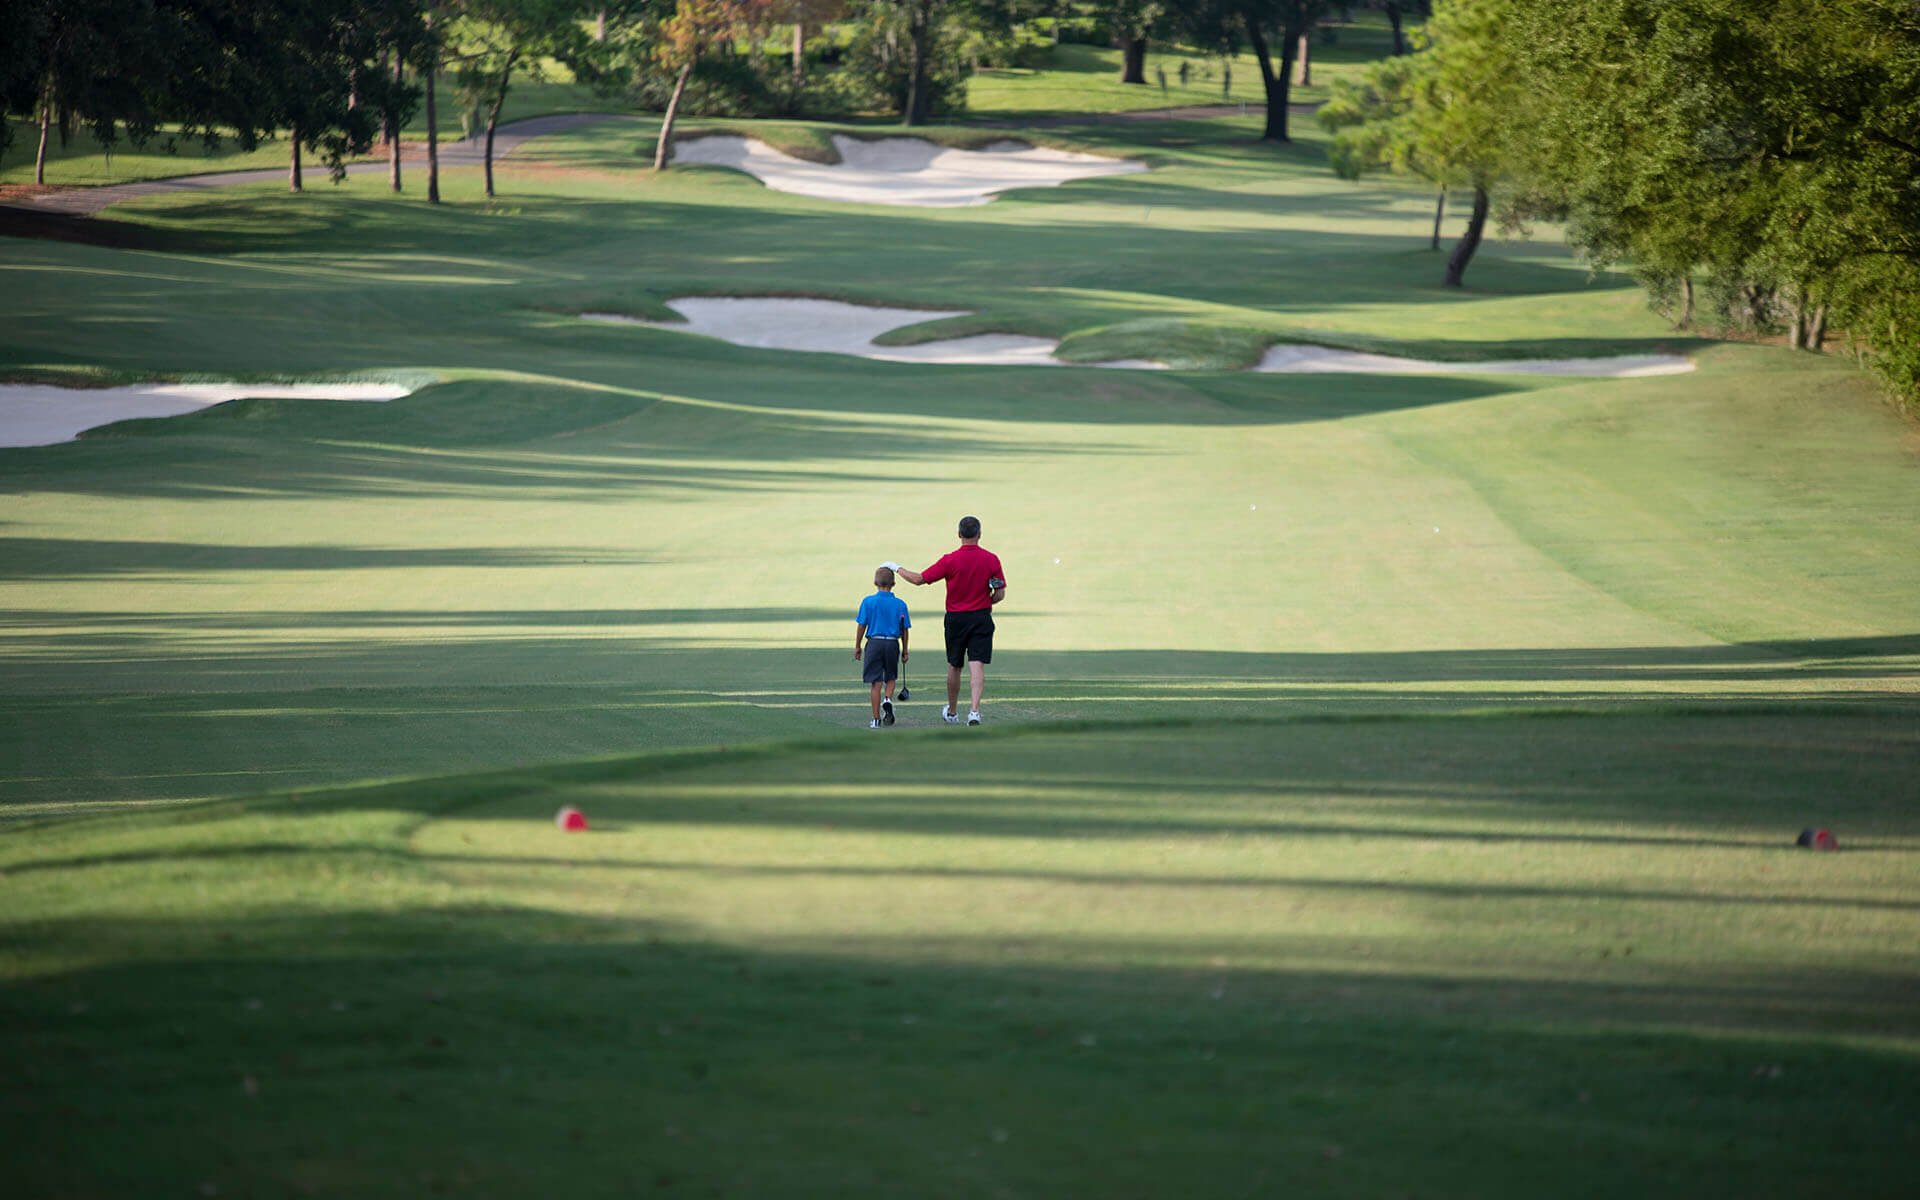 A father and son on the golf course